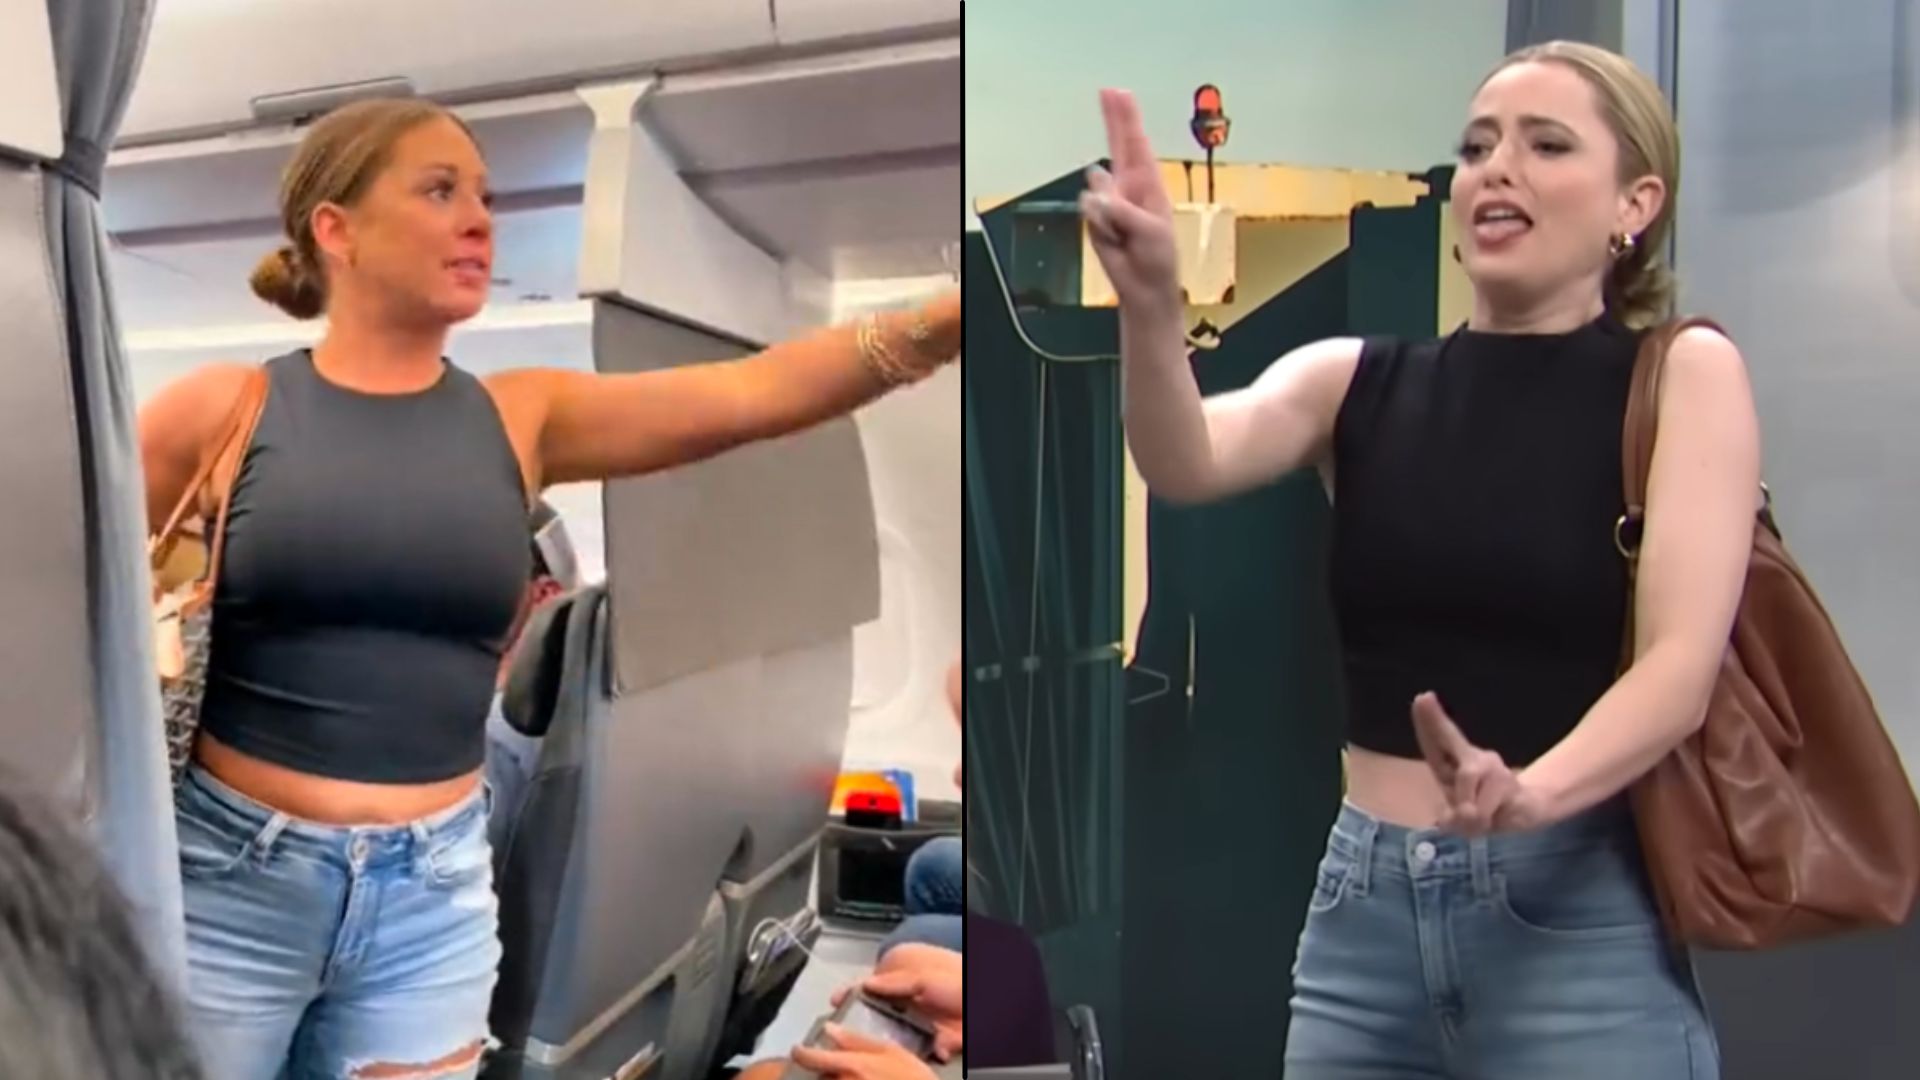 Viral “not real” plane woman responds to SNL skit mocking her